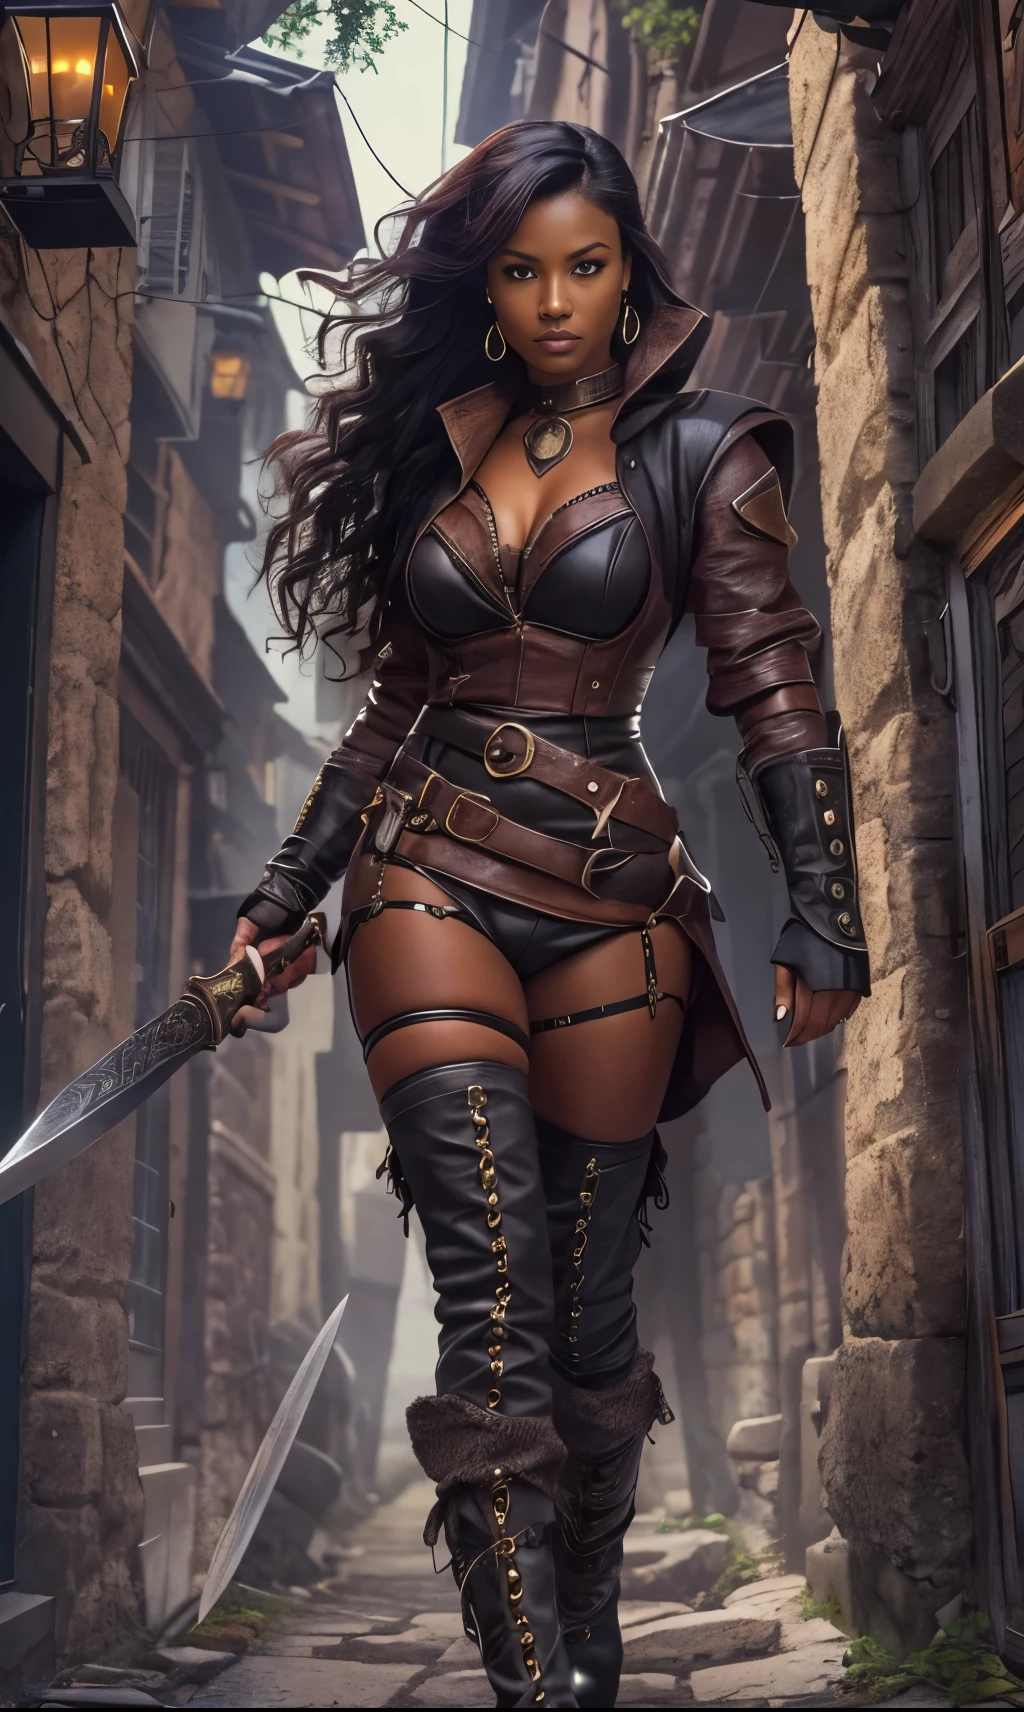 (a detailed female rogue,a black-skinned female rogue,a black skinned female rogue with an intense expression)black female rogue,sneaking through an alley in a medieval town,leather armor with a skimpy design,showing a hint of sensuality,curly black hair,flowing and vibrant,holding a shiny dagger in one hand,holding a leather whip in the other hand as a weapon,"high-heeled leather boots",giving her an agile and dangerous aura,medieval-themed alley,with dim and flickering lanterns casting a mysterious and eerie light,ancient architecture towering on both sides of the alley,adding a sense of history and atmosphere